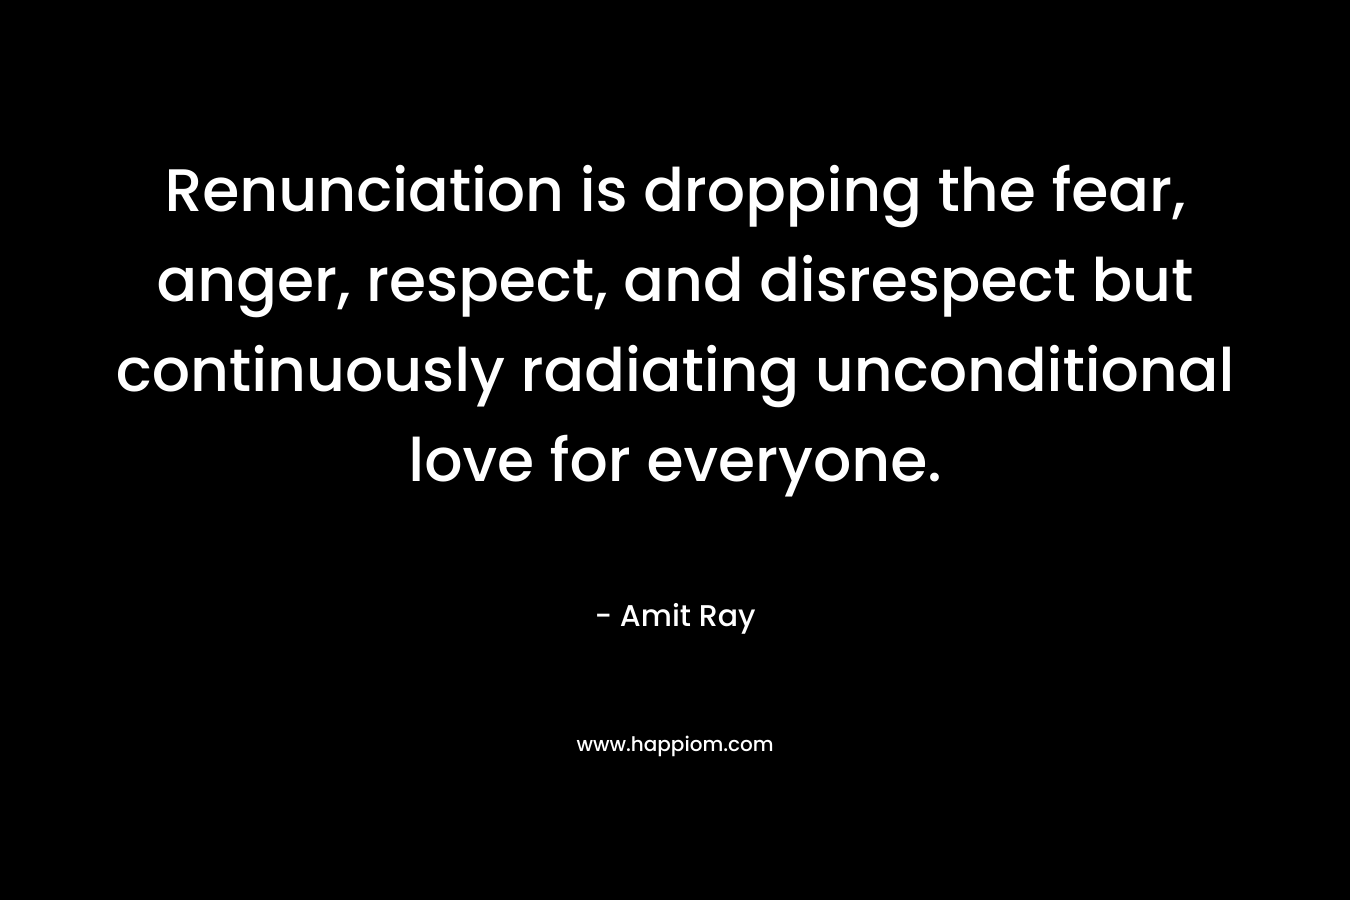 Renunciation is dropping the fear, anger, respect, and disrespect but continuously radiating unconditional love for everyone. – Amit Ray